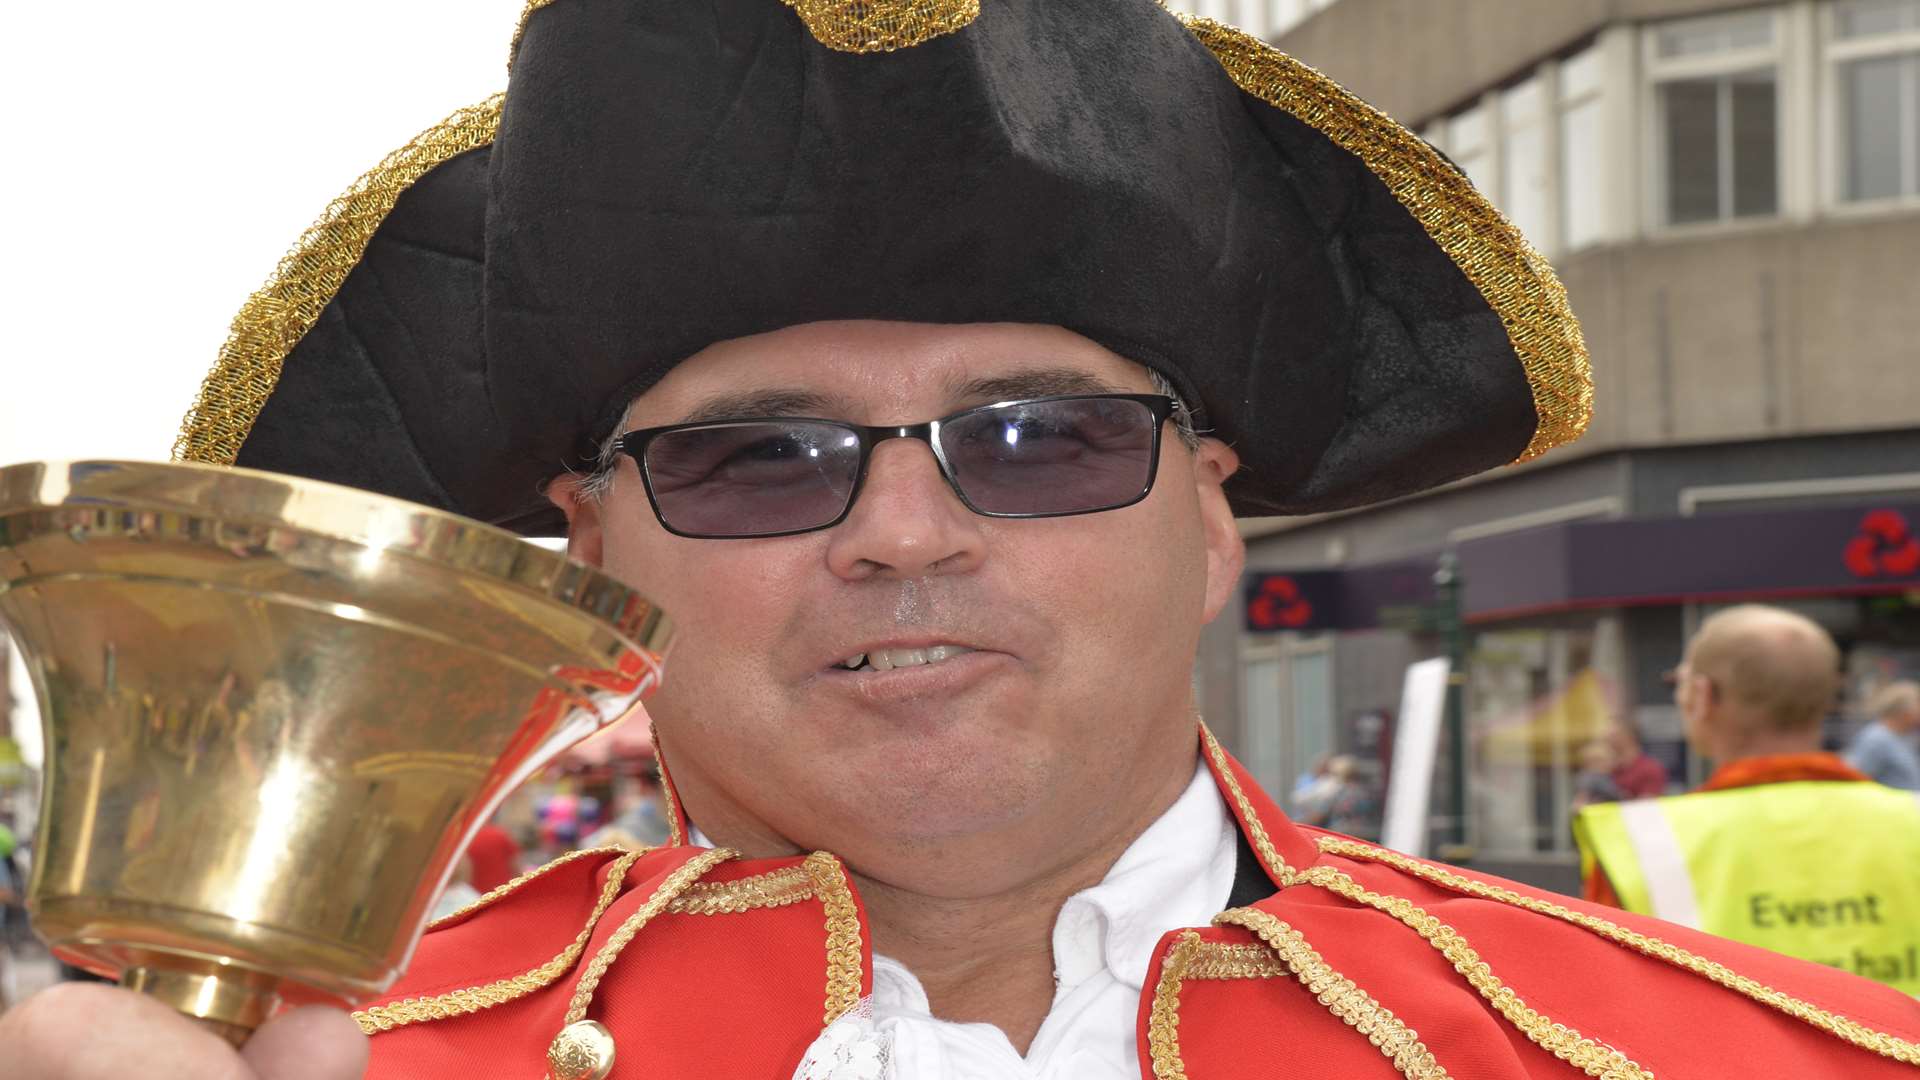 Town Crier Richard Spooner will be announcing the days events